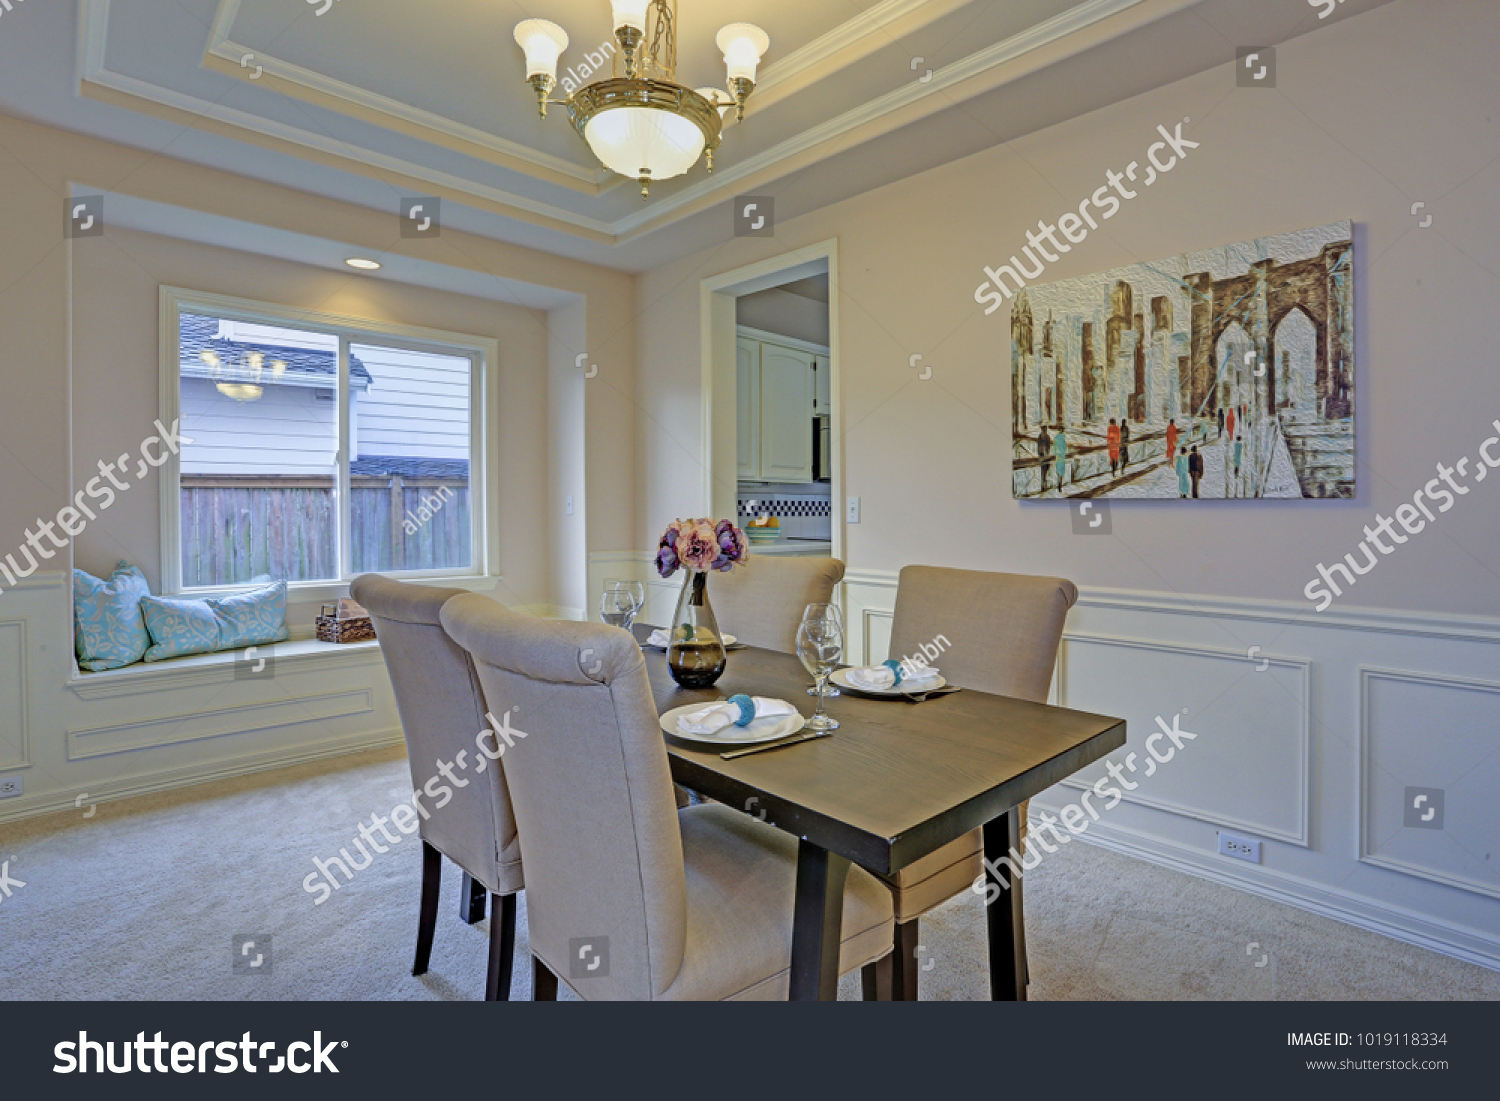 Chic Dining Room Light Grey Walls Stock Image Download Now